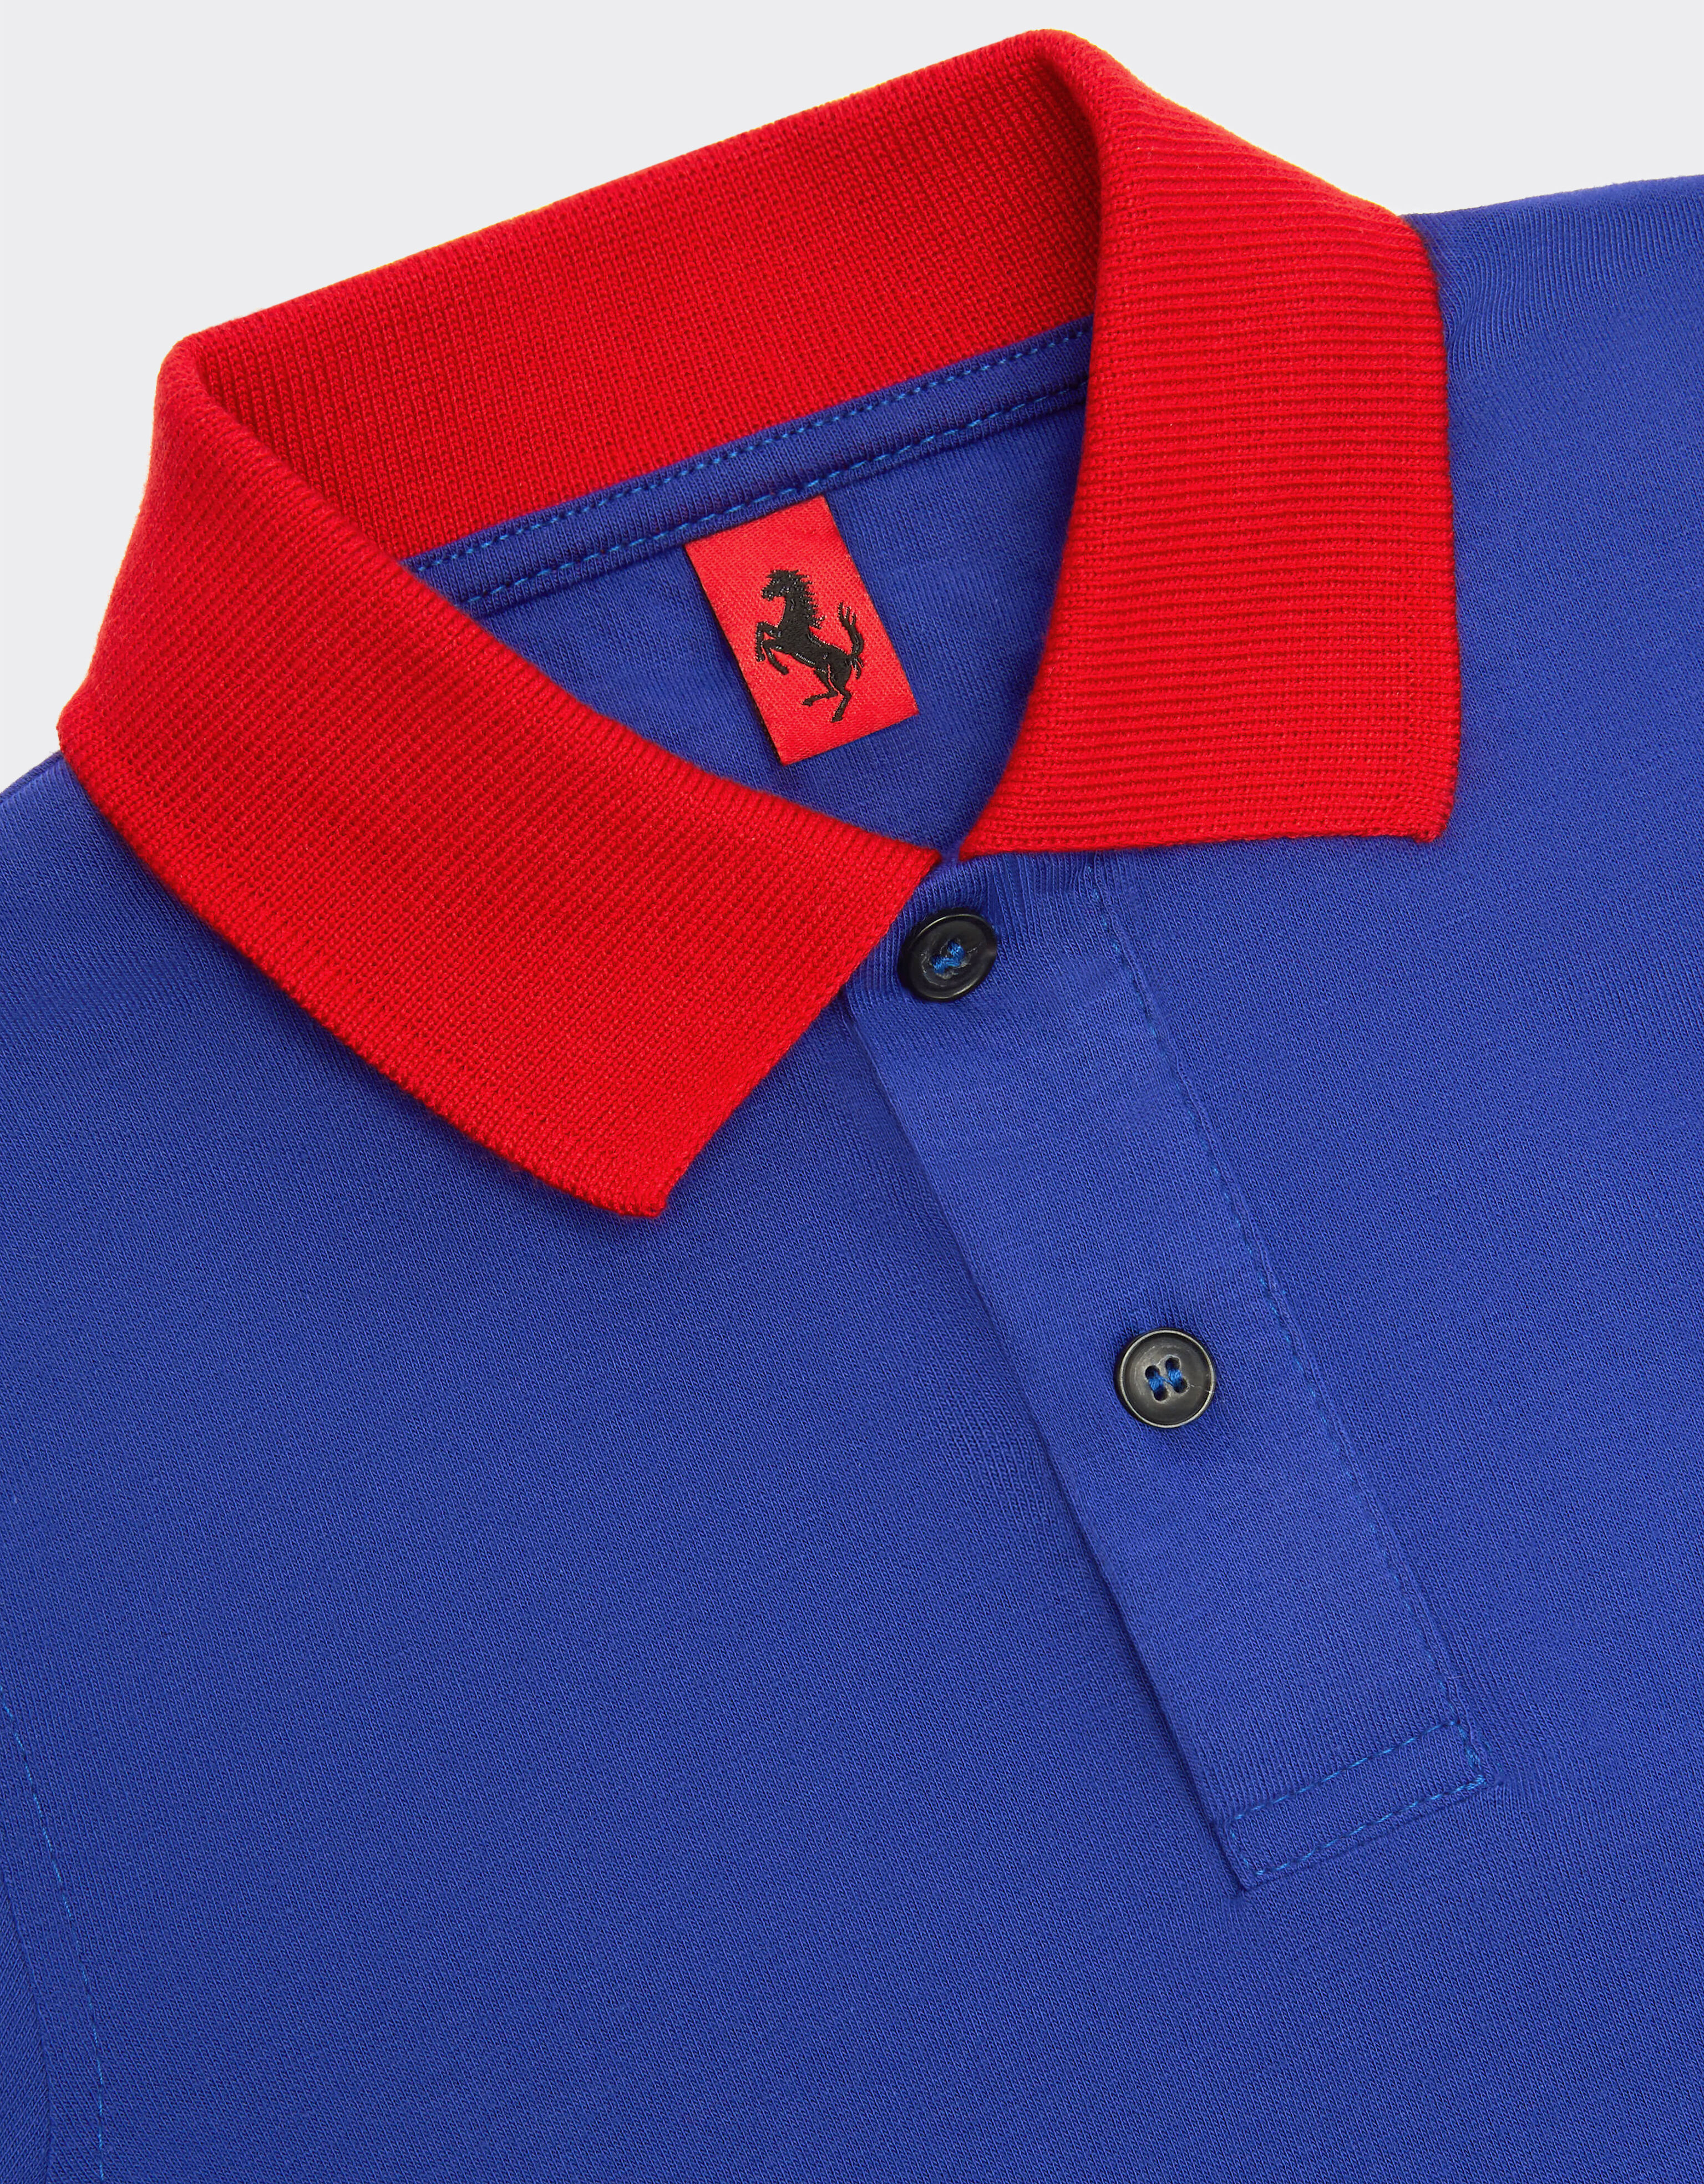 Ferrari Short sleeves - Contrast collar and cuffs - Front buttoning Antique Blue 20160fK